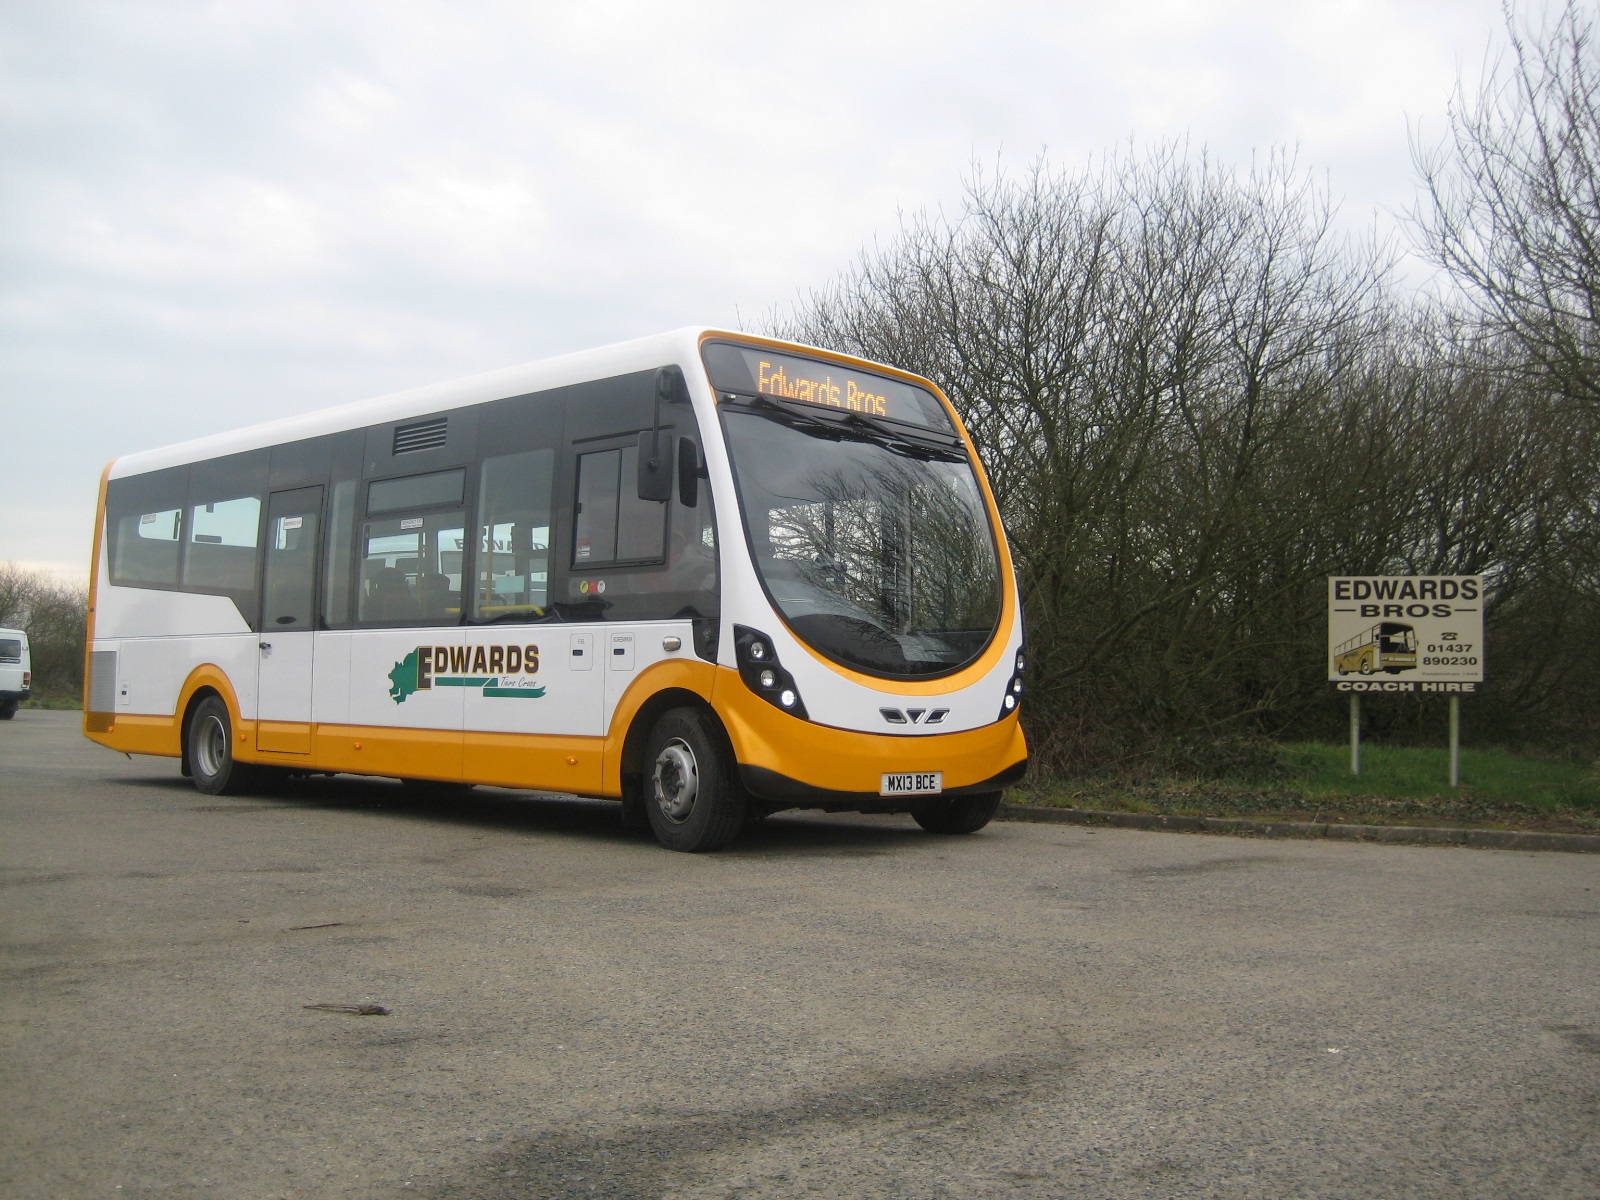 Edwards Bros Coaches purchase completed by Pembrokeshire County Council